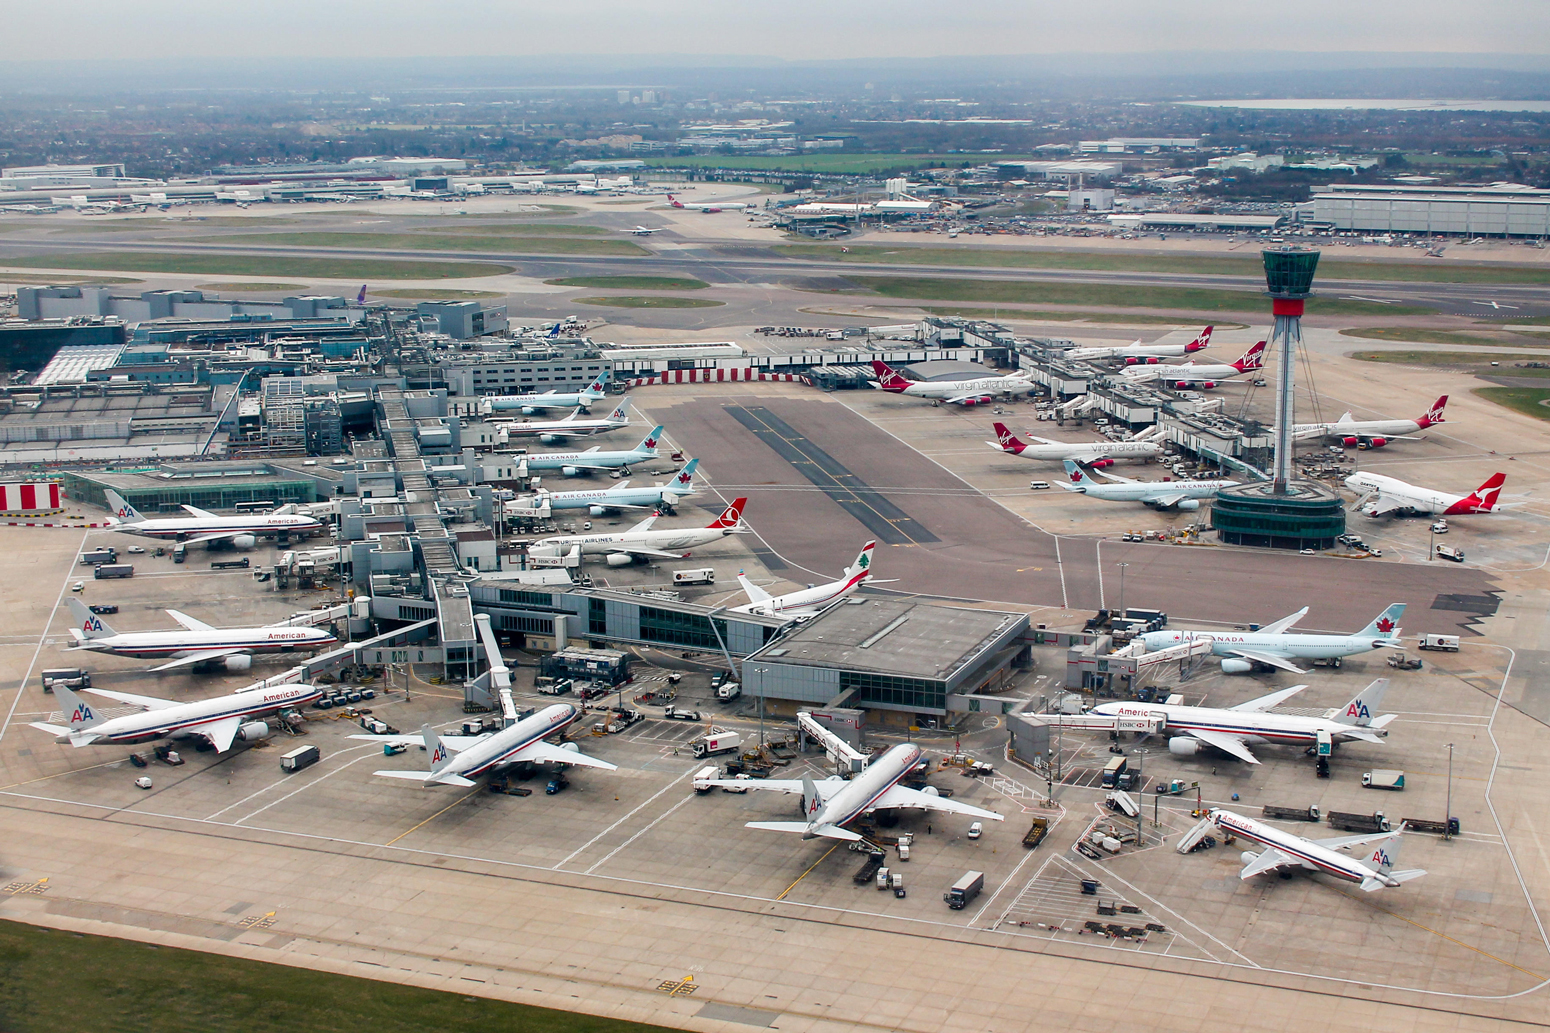 Guest post: Planned growth of UK airports not consistent with net-zero climate goal